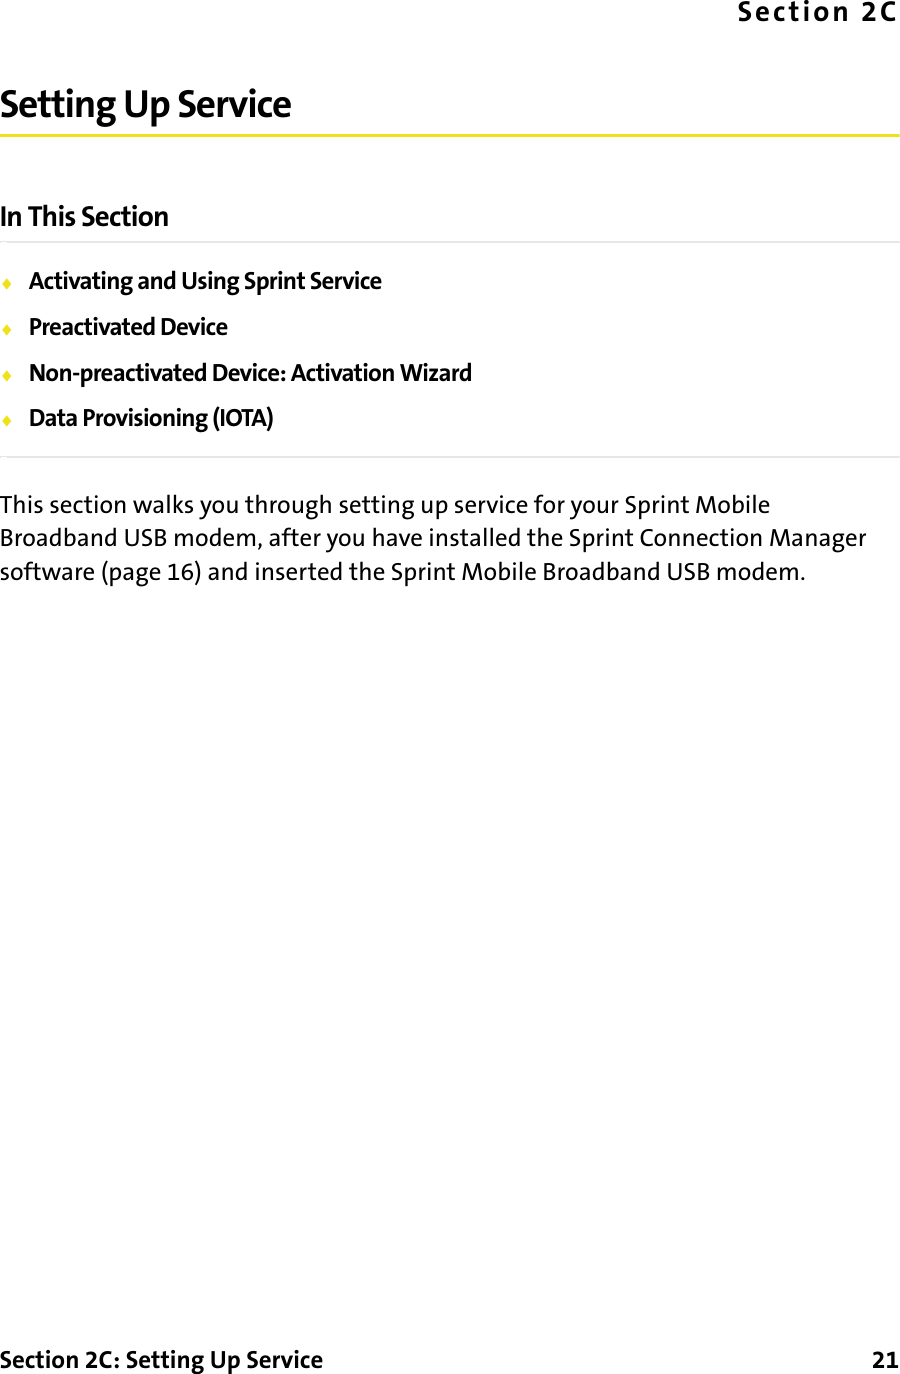 Section 2C: Setting Up Service      21Section 2CSetting Up ServiceIn This Section⽧Activating and Using Sprint Service⽧Preactivated Device⽧Non-preactivated Device: Activation Wizard⽧Data Provisioning (IOTA)This section walks you through setting up service for your Sprint Mobile Broadband USB modem, after you have installed the Sprint Connection Manager software (page 16) and inserted the Sprint Mobile Broadband USB modem.